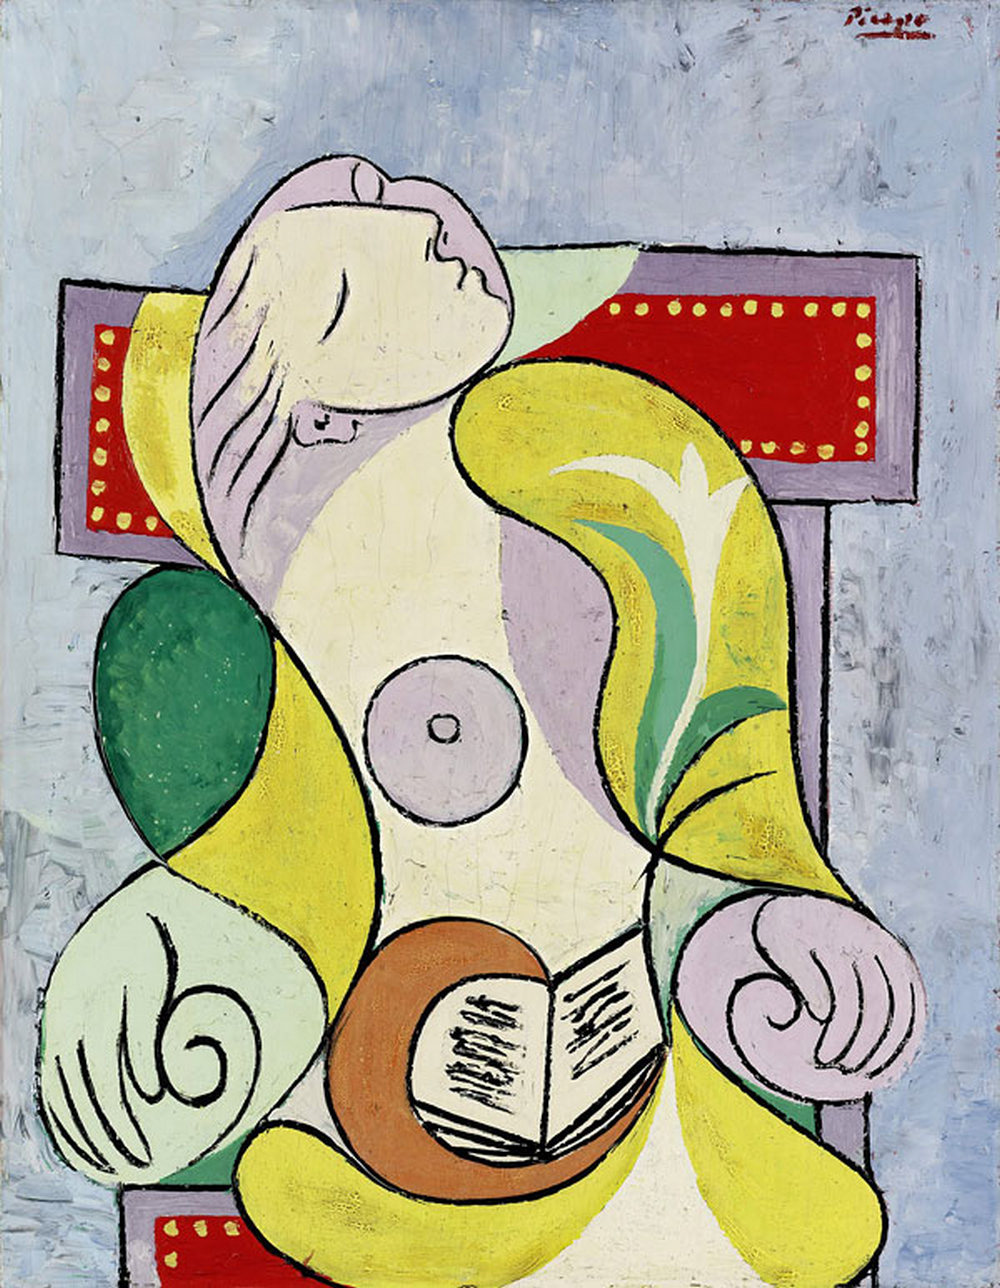 Pablo Picasso's painting - Reading